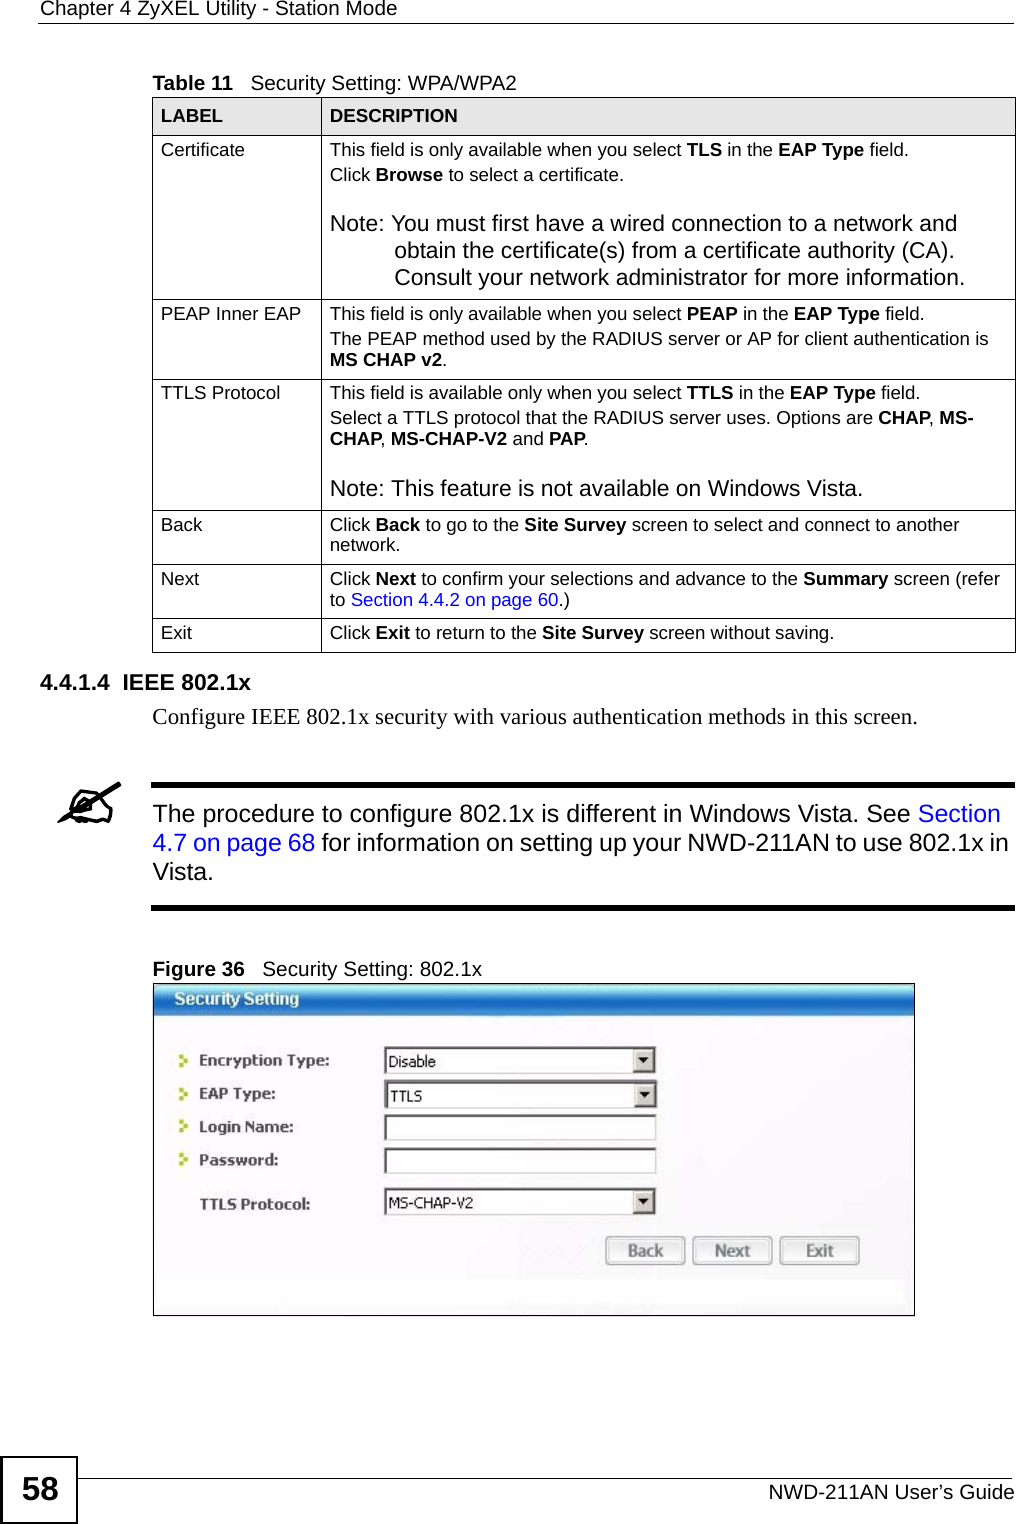 Chapter 4 ZyXEL Utility - Station ModeNWD-211AN User’s Guide584.4.1.4  IEEE 802.1xConfigure IEEE 802.1x security with various authentication methods in this screen. &quot;The procedure to configure 802.1x is different in Windows Vista. See Section 4.7 on page 68 for information on setting up your NWD-211AN to use 802.1x in Vista.Figure 36   Security Setting: 802.1x Certificate This field is only available when you select TLS in the EAP Type field. Click Browse to select a certificate.Note: You must first have a wired connection to a network and obtain the certificate(s) from a certificate authority (CA). Consult your network administrator for more information.PEAP Inner EAP This field is only available when you select PEAP in the EAP Type field.The PEAP method used by the RADIUS server or AP for client authentication is MS CHAP v2.TTLS Protocol This field is available only when you select TTLS in the EAP Type field. Select a TTLS protocol that the RADIUS server uses. Options are CHAP, MS-CHAP, MS-CHAP-V2 and PAP.Note: This feature is not available on Windows Vista.Back Click Back to go to the Site Survey screen to select and connect to another network.Next Click Next to confirm your selections and advance to the Summary screen (refer to Section 4.4.2 on page 60.)Exit Click Exit to return to the Site Survey screen without saving.Table 11   Security Setting: WPA/WPA2LABEL DESCRIPTION